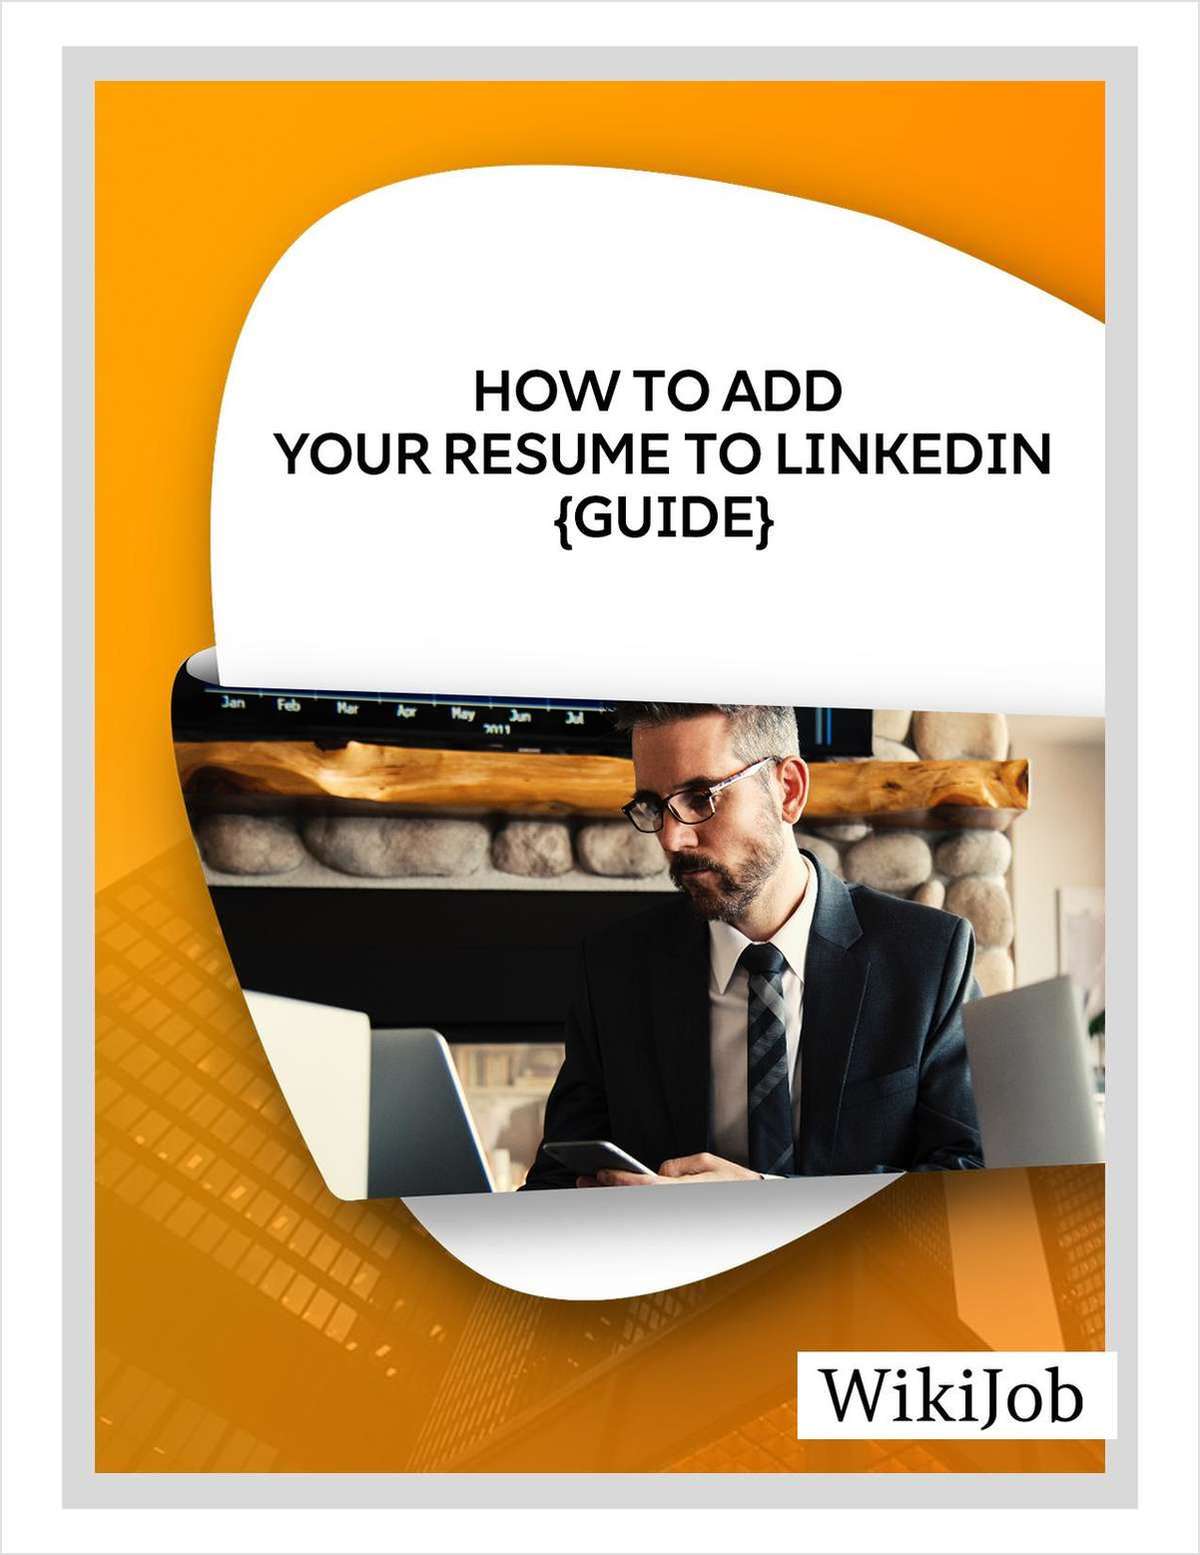 How to Add Your Resume to LinkedIn